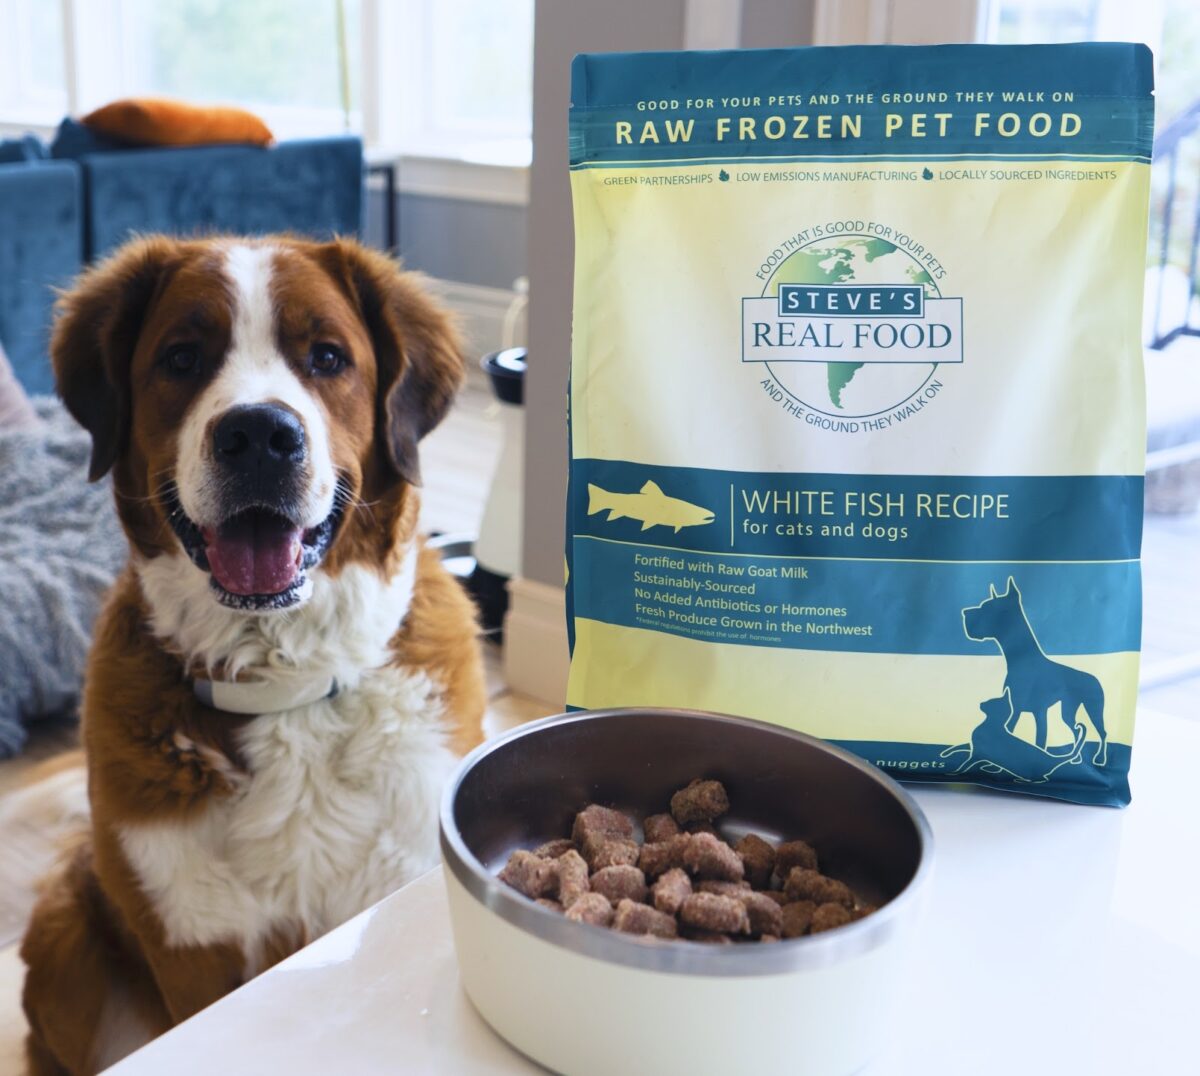 Dog sitting next to bag of Raw Frozen Pet Food White Fish Recipe and dish